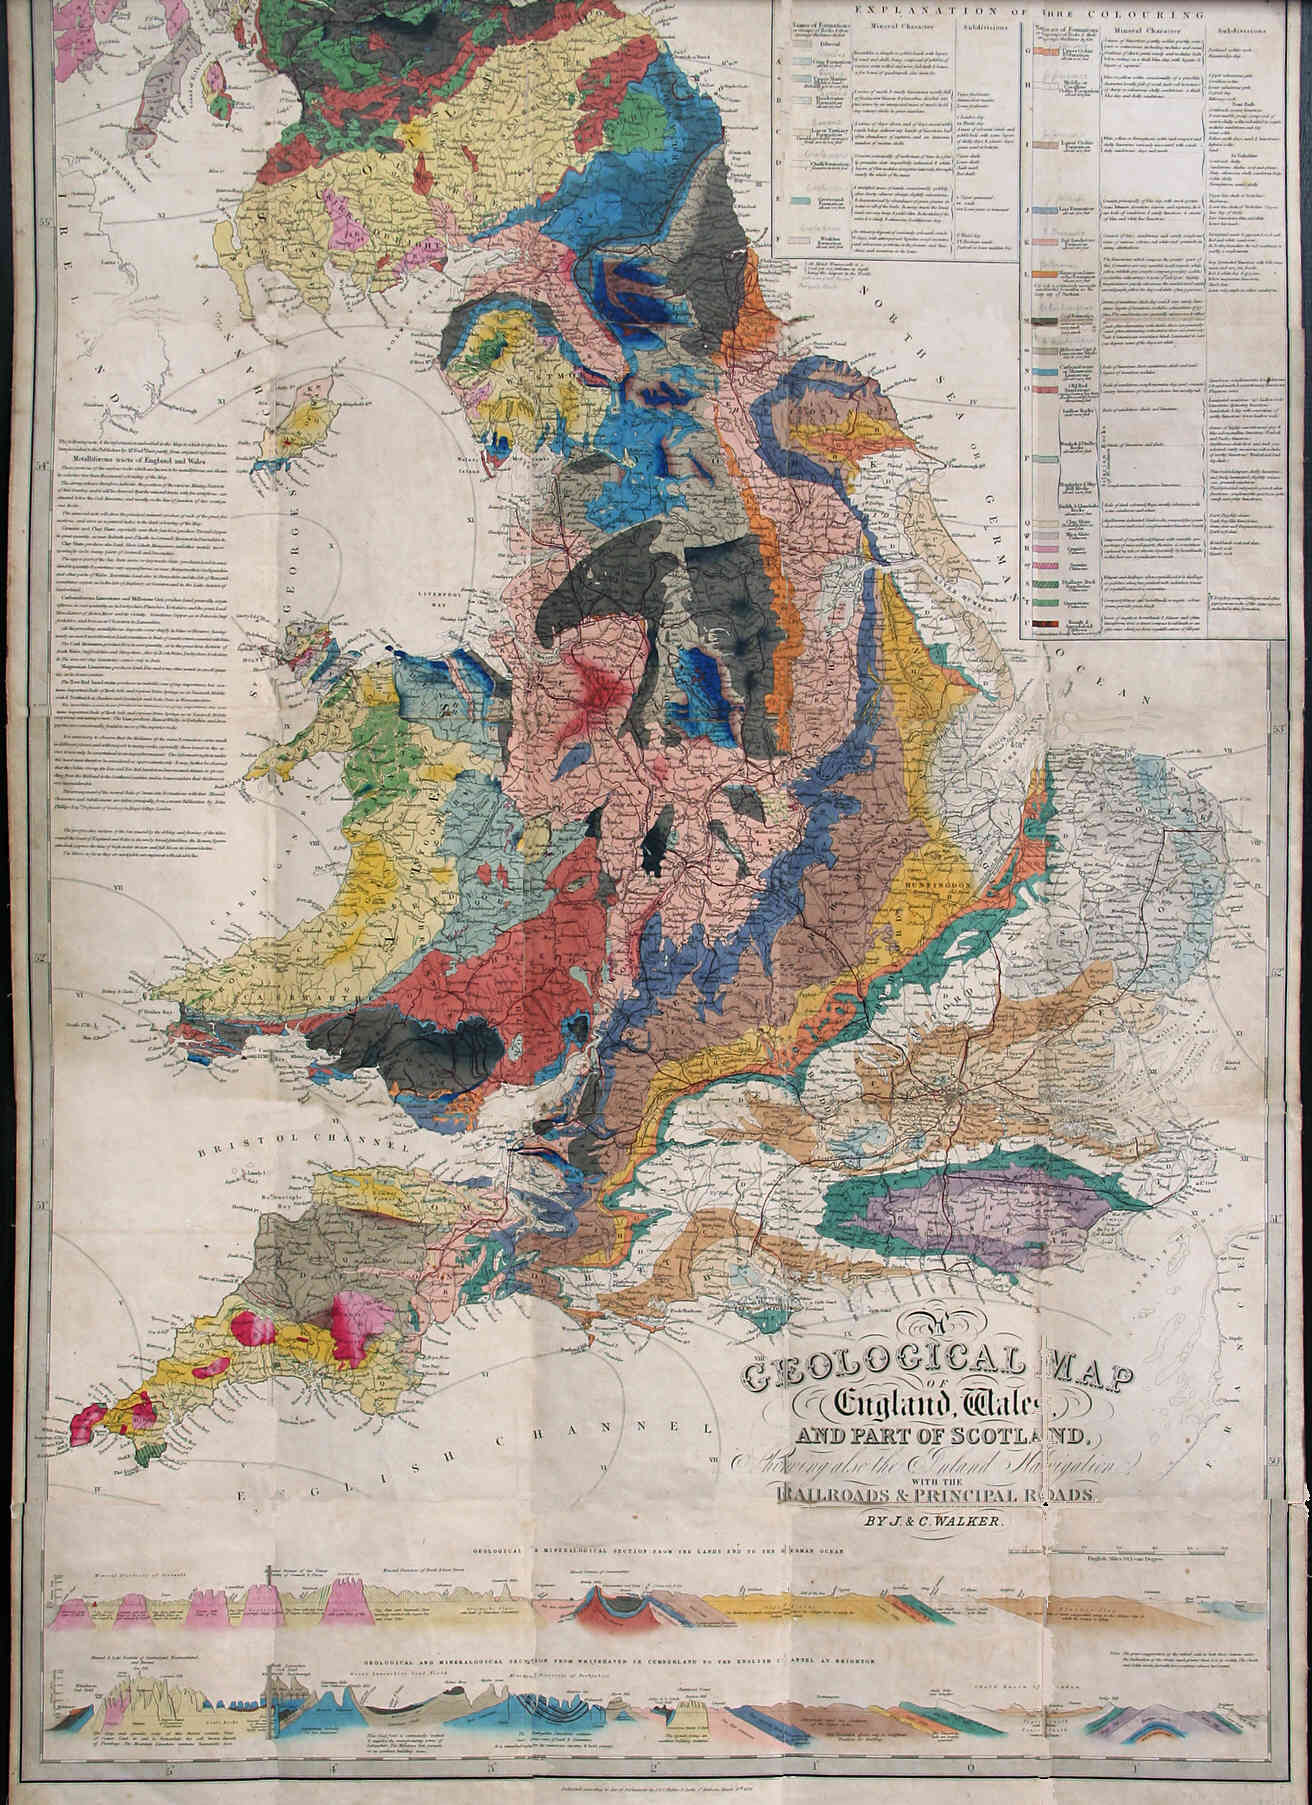 Whole of Walker 1838 geological map